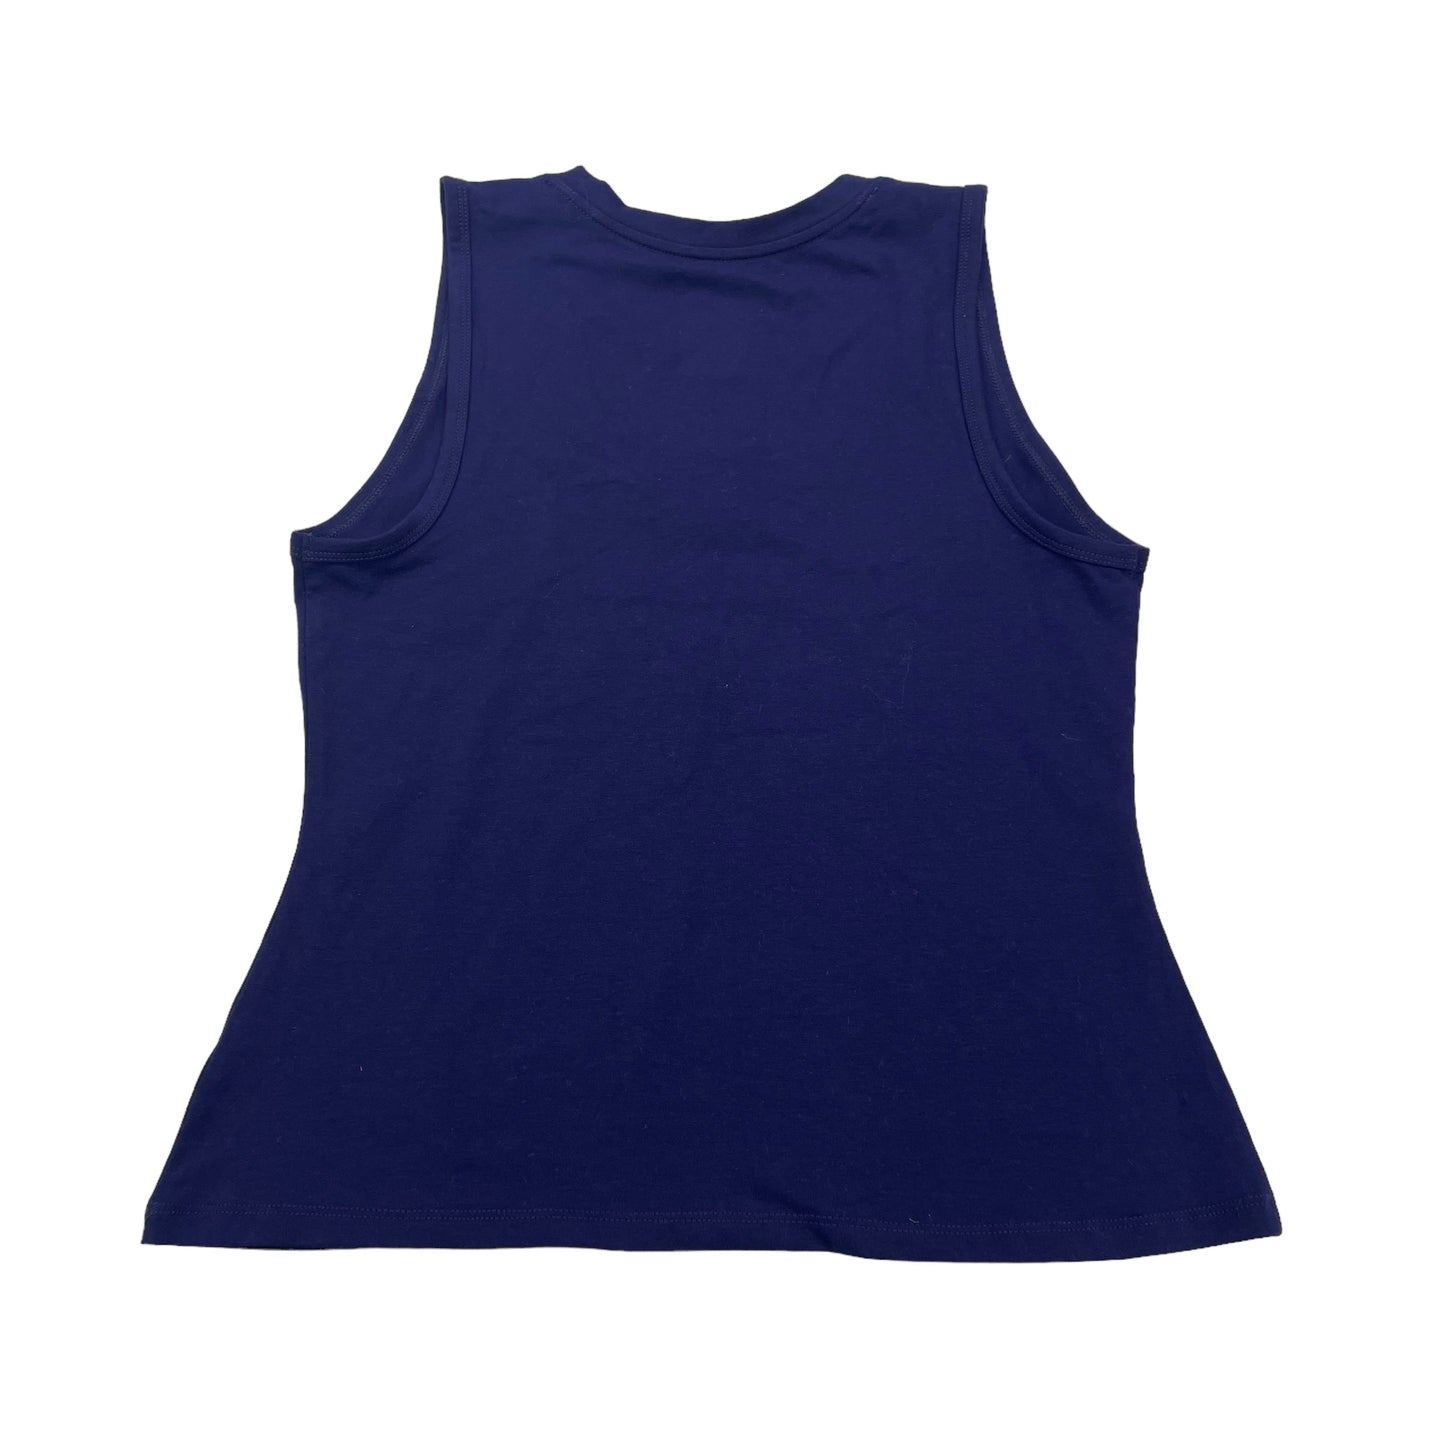 PURPLE TANK TOP by A NEW DAY Size:M